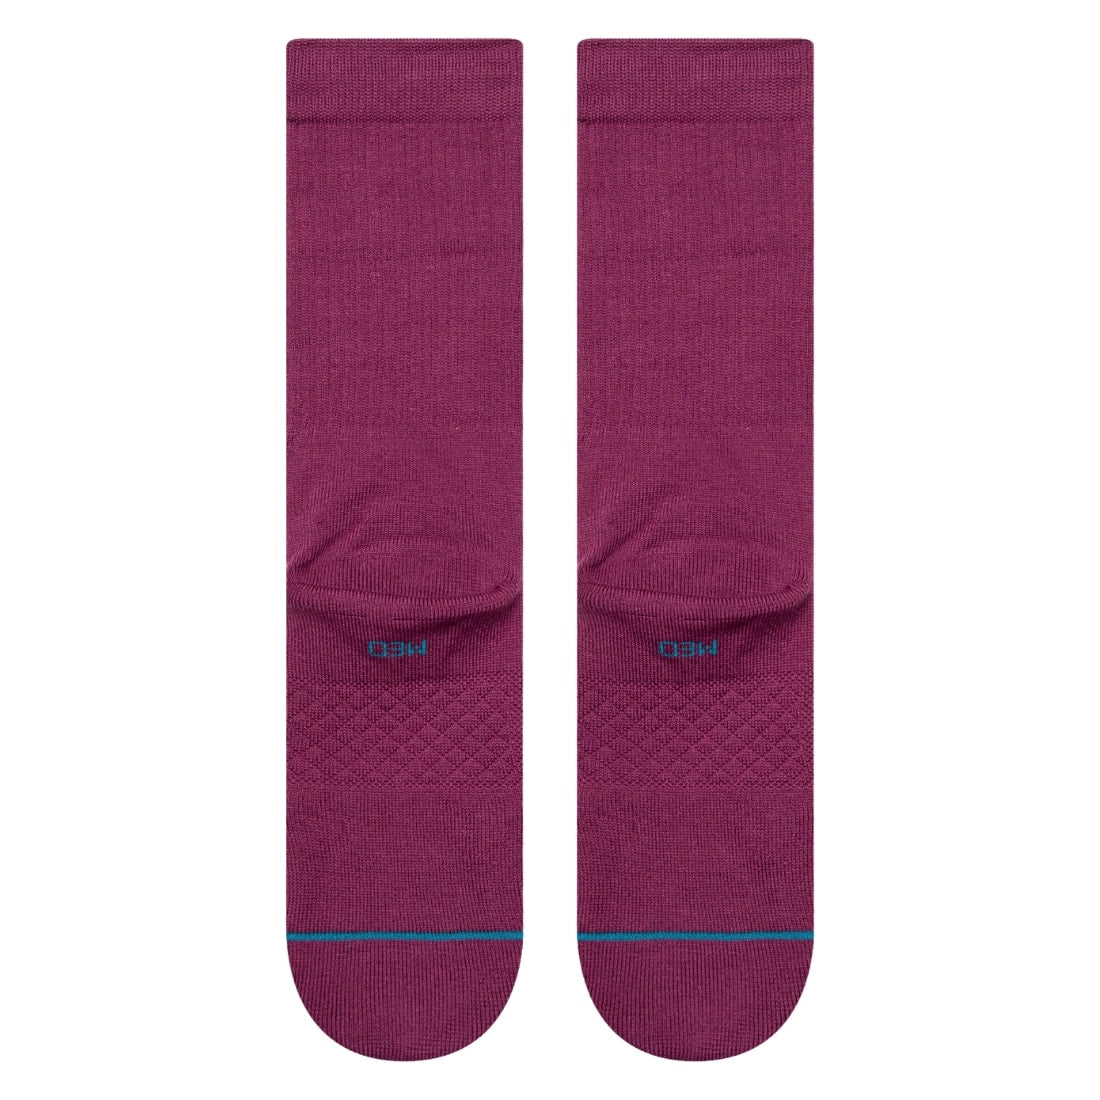 Stance Icon Socks - Berry - Mens Crew Length Socks by Stance